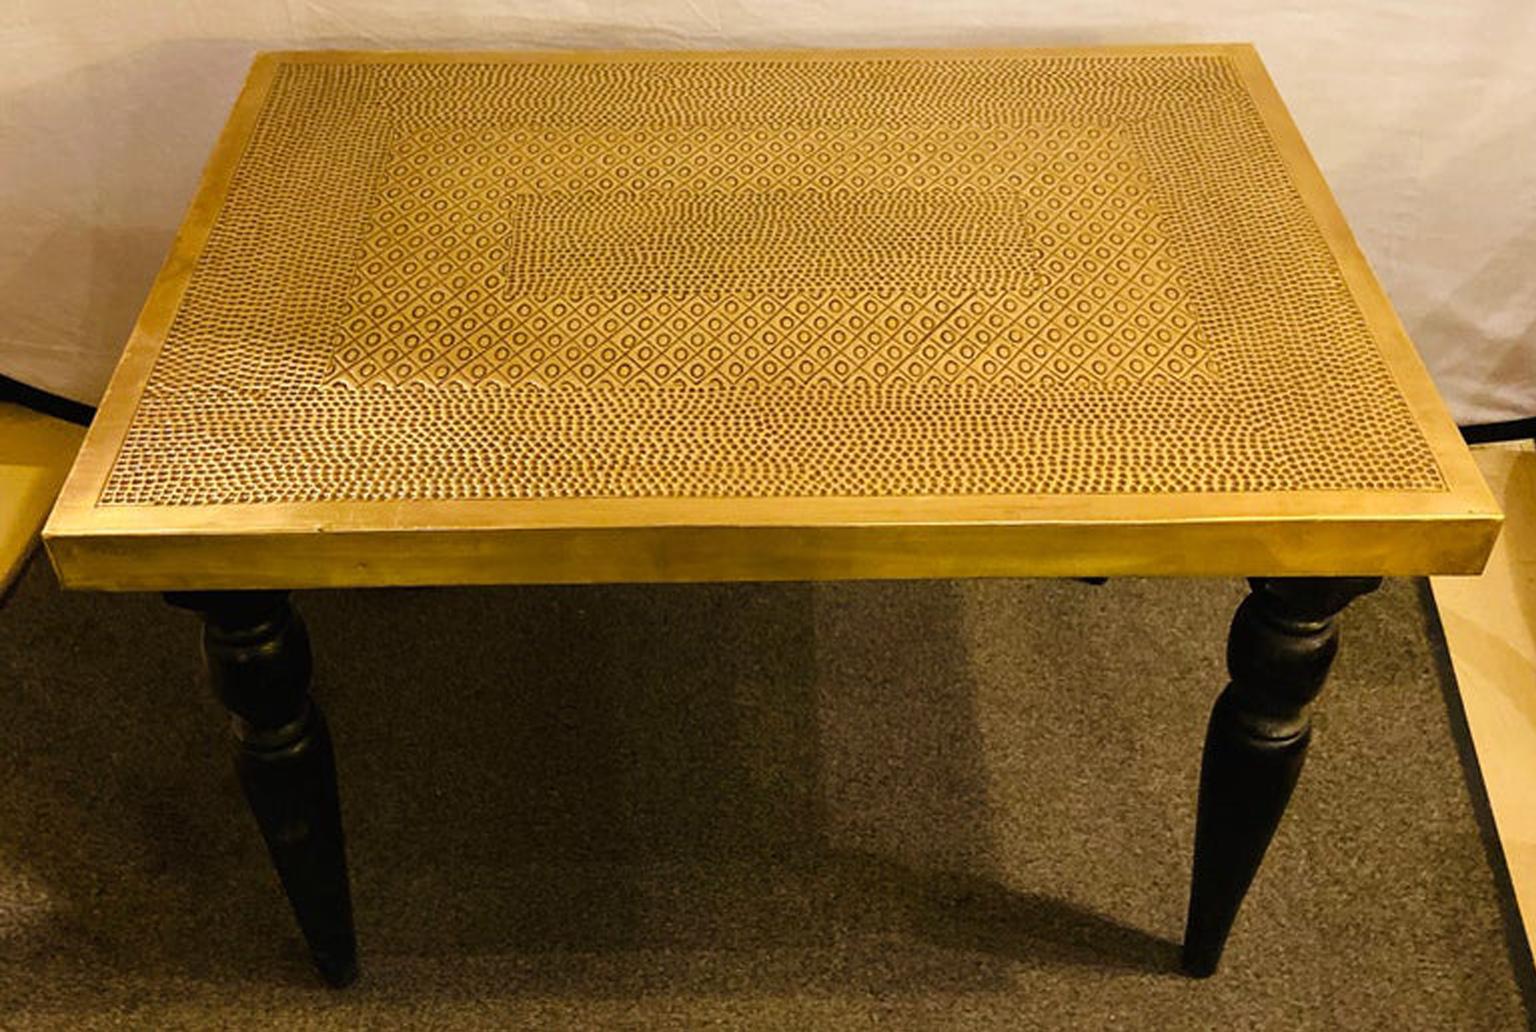 Hollywood Regency style brass center or end table

A chic and very stylish Hollywood Regency brass rectangular table. The table features a fine handmade hammered design on the all gold brass top. The legs made of ebonized wood are nicely carved.